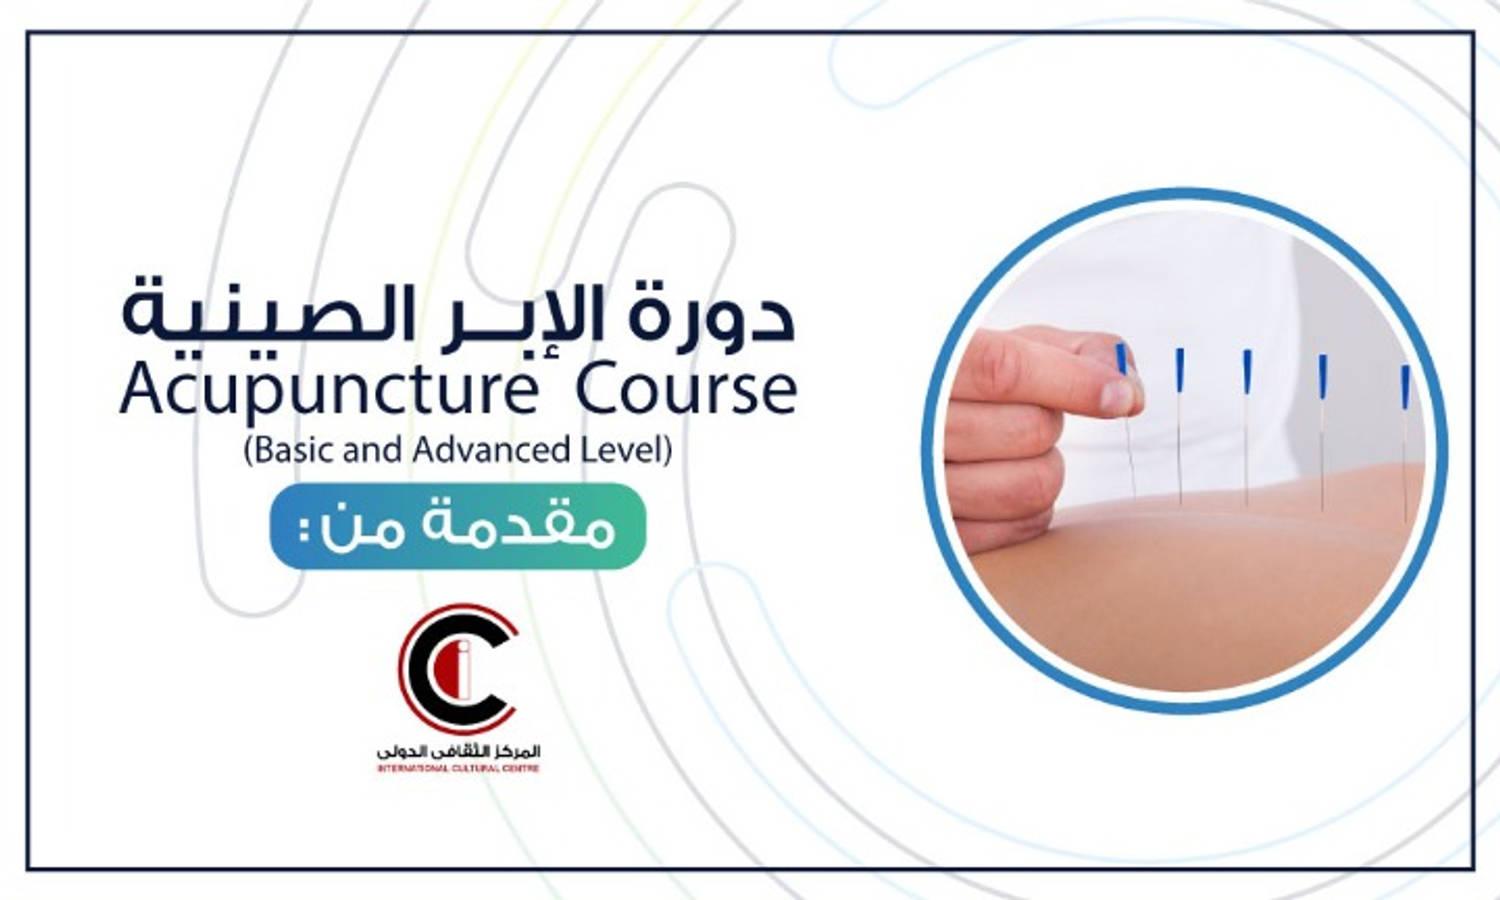 Acupuncture Course (Basic and Advanced Level)